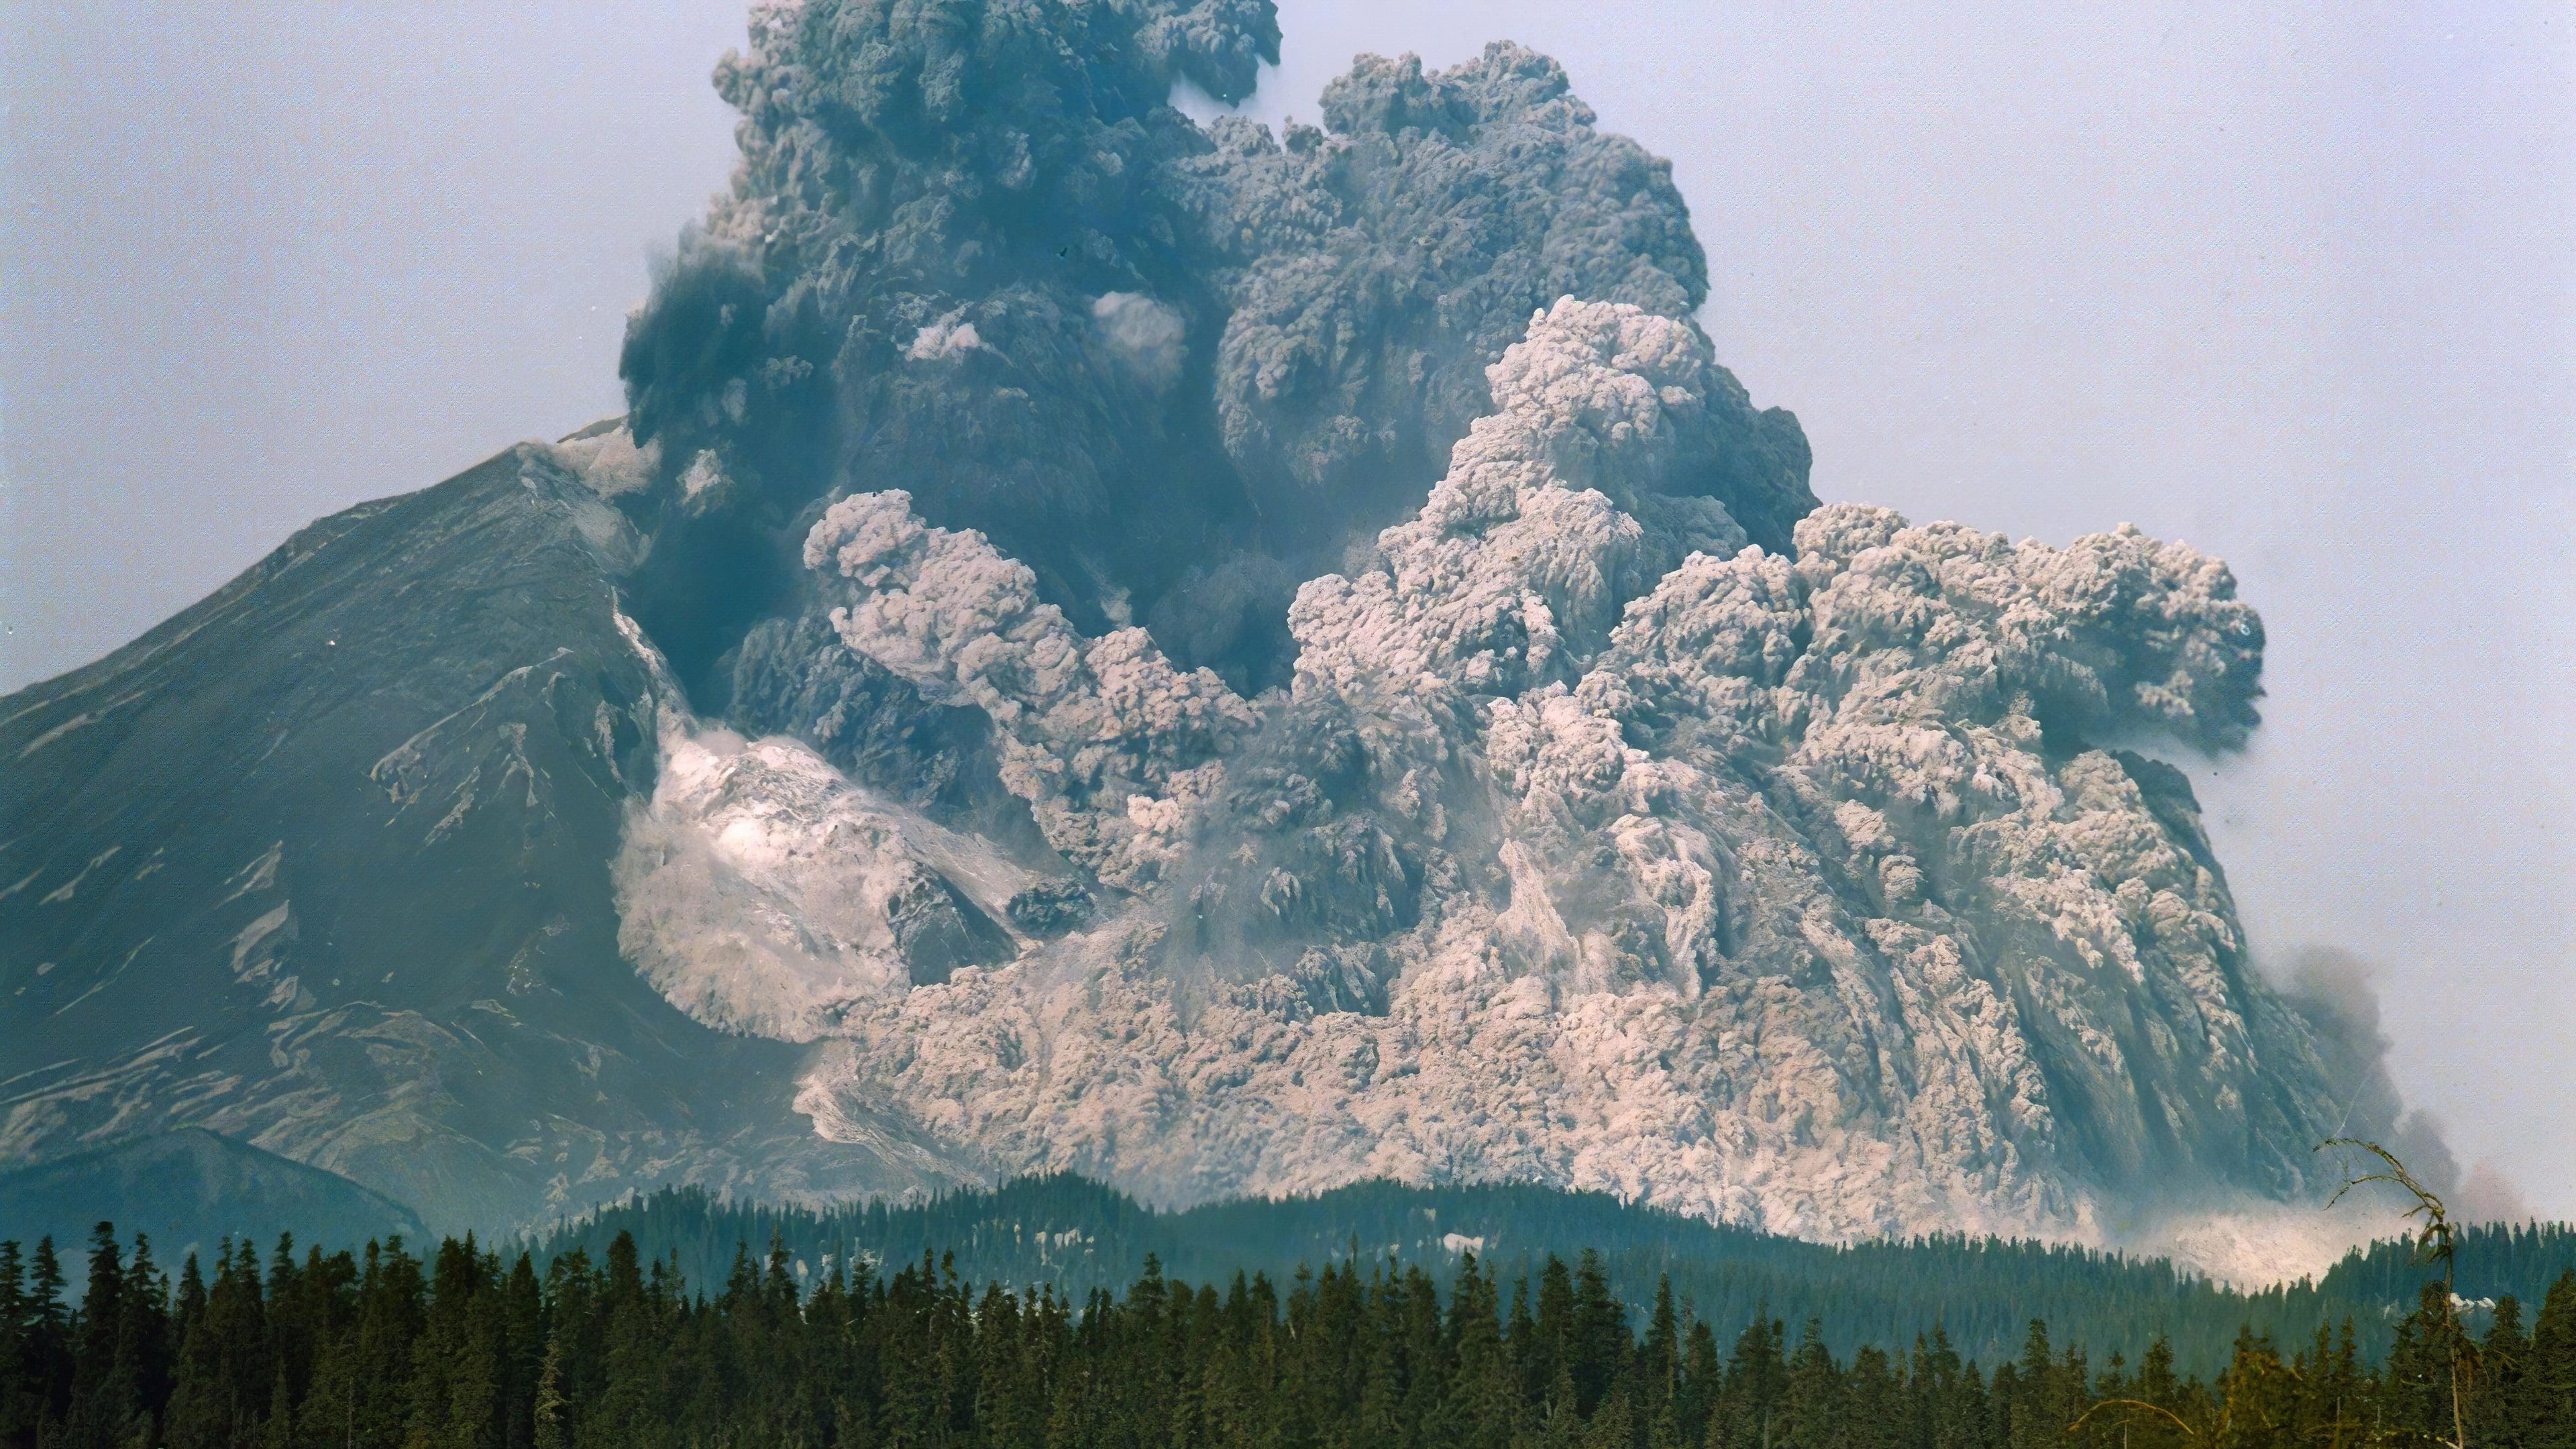 Surviving the Mount St. Helens Disaster backdrop